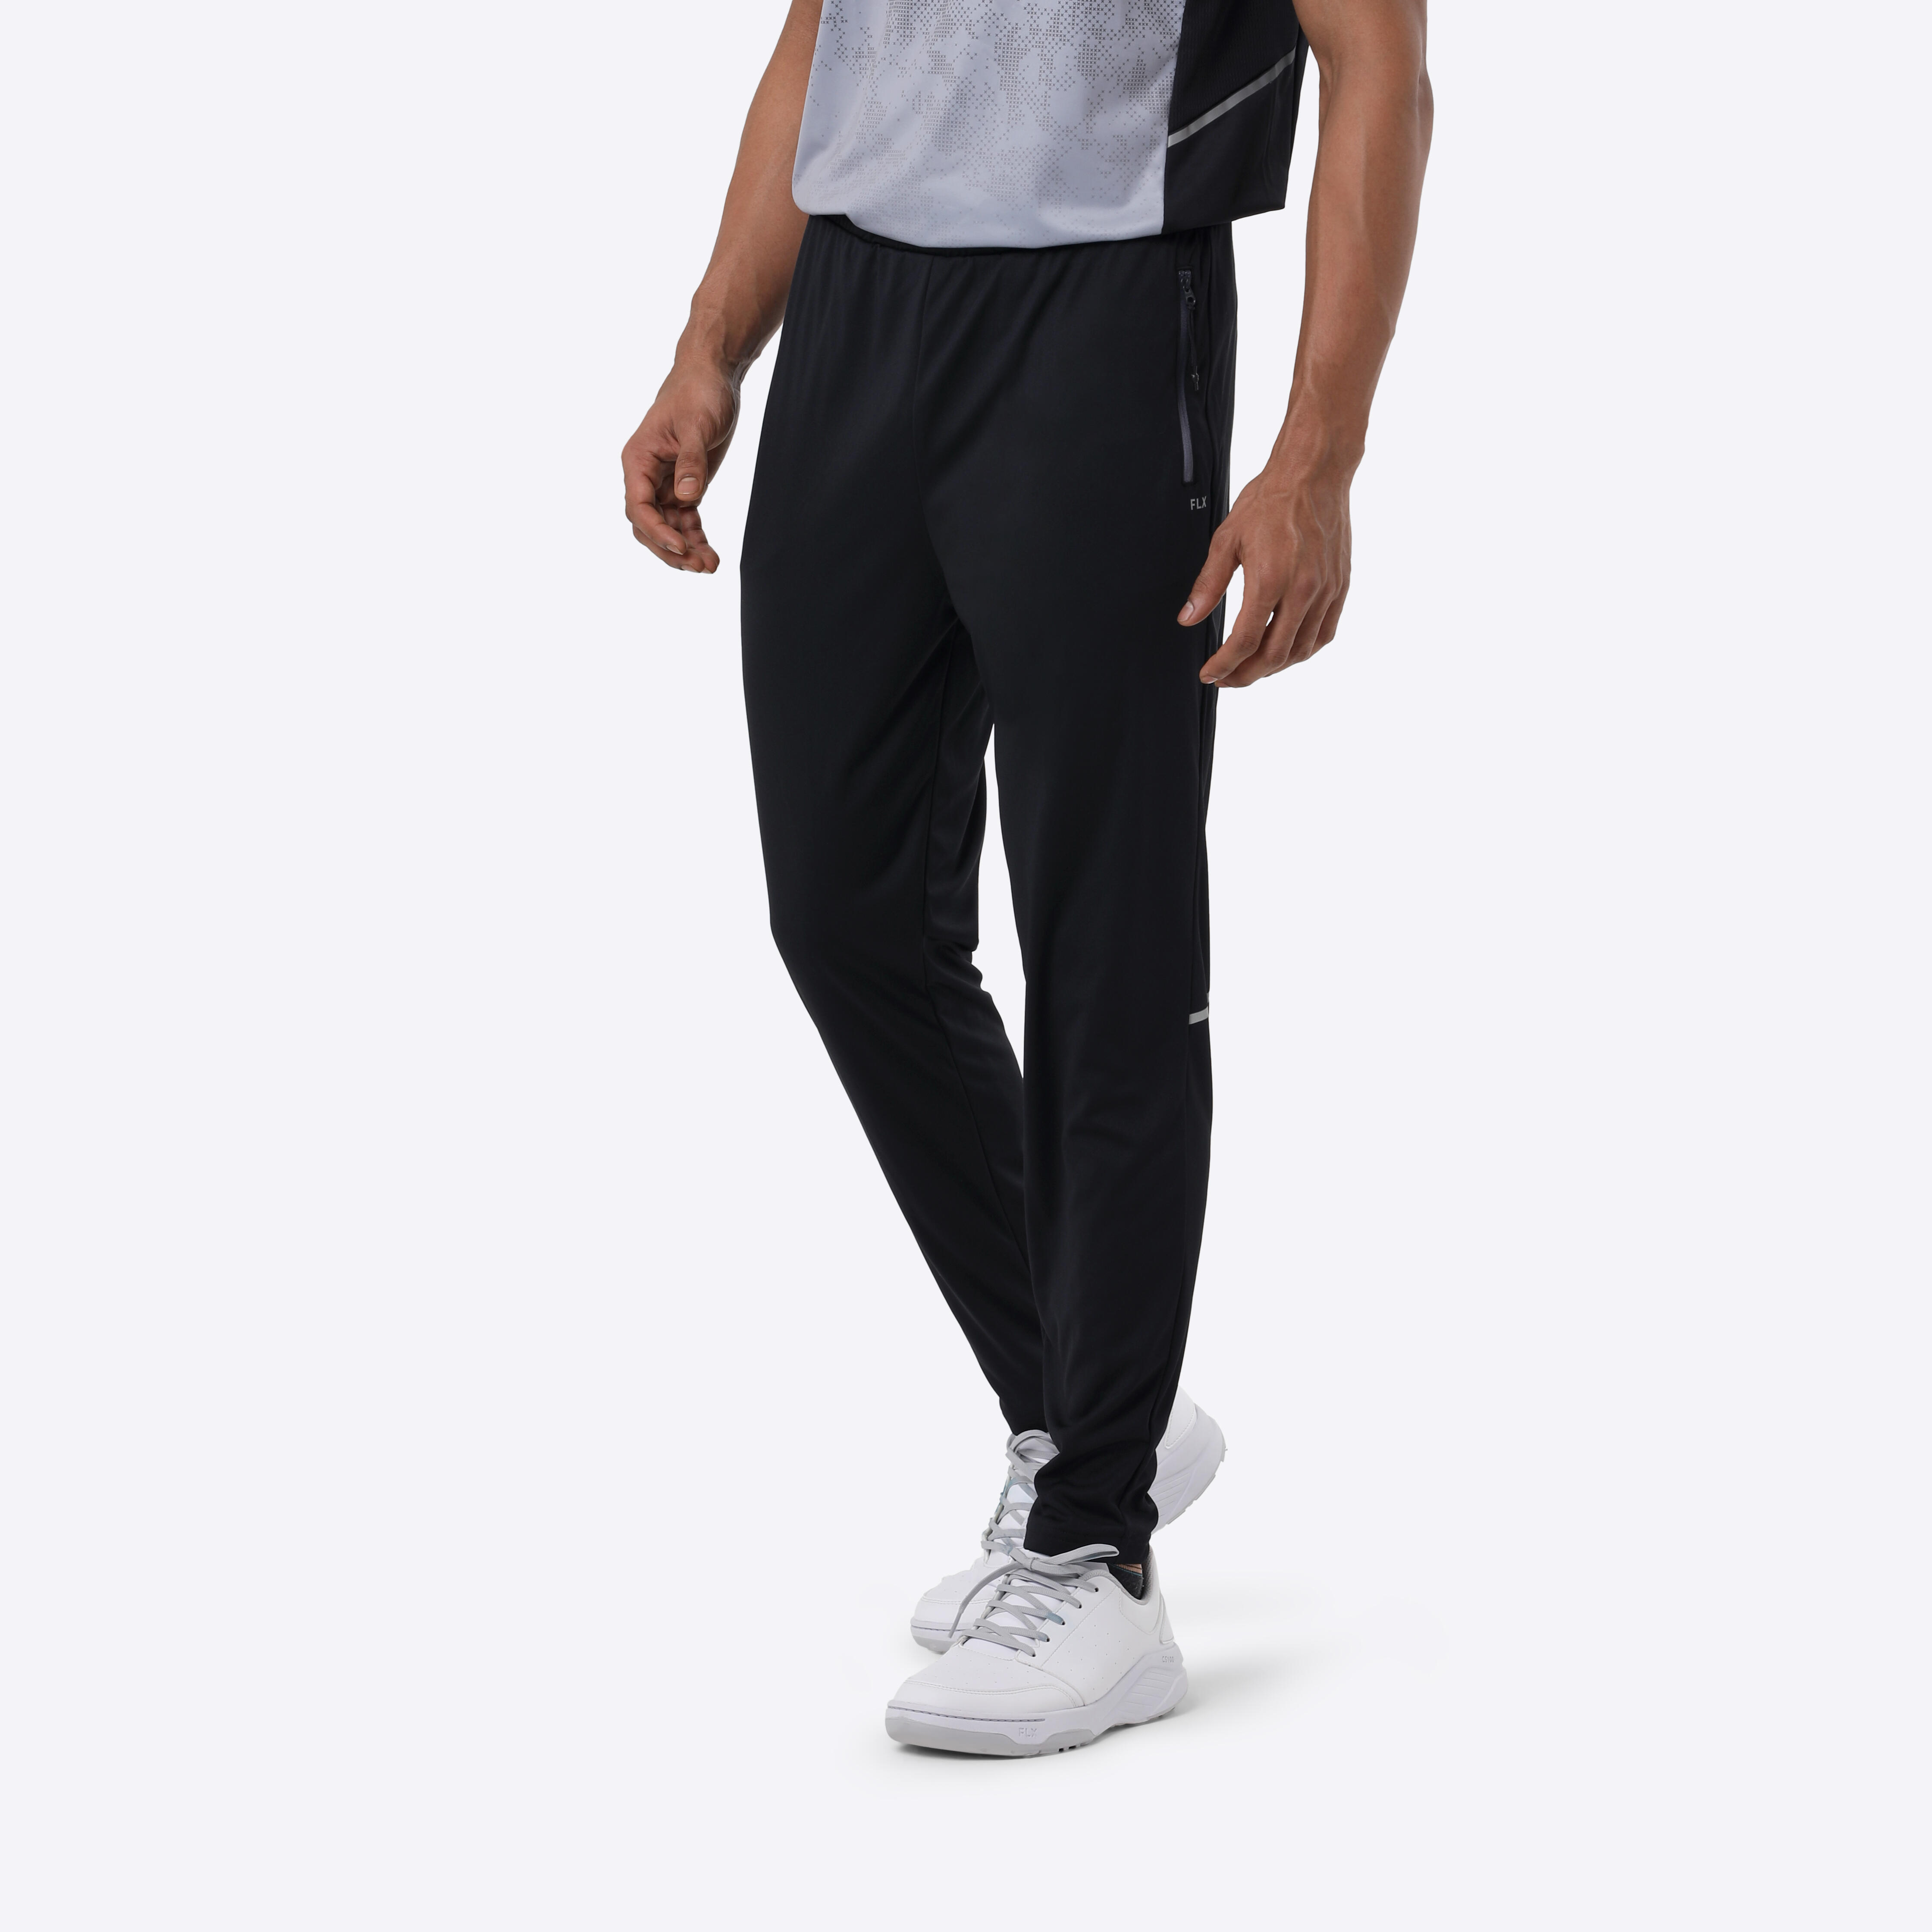 Shrey Premium Cricket Black Coloured Trouser Size | Buy Online India |  Cricket Clothing, Kit & Whites | See Price, Photos & Features | Specialist  Cricket Shop India